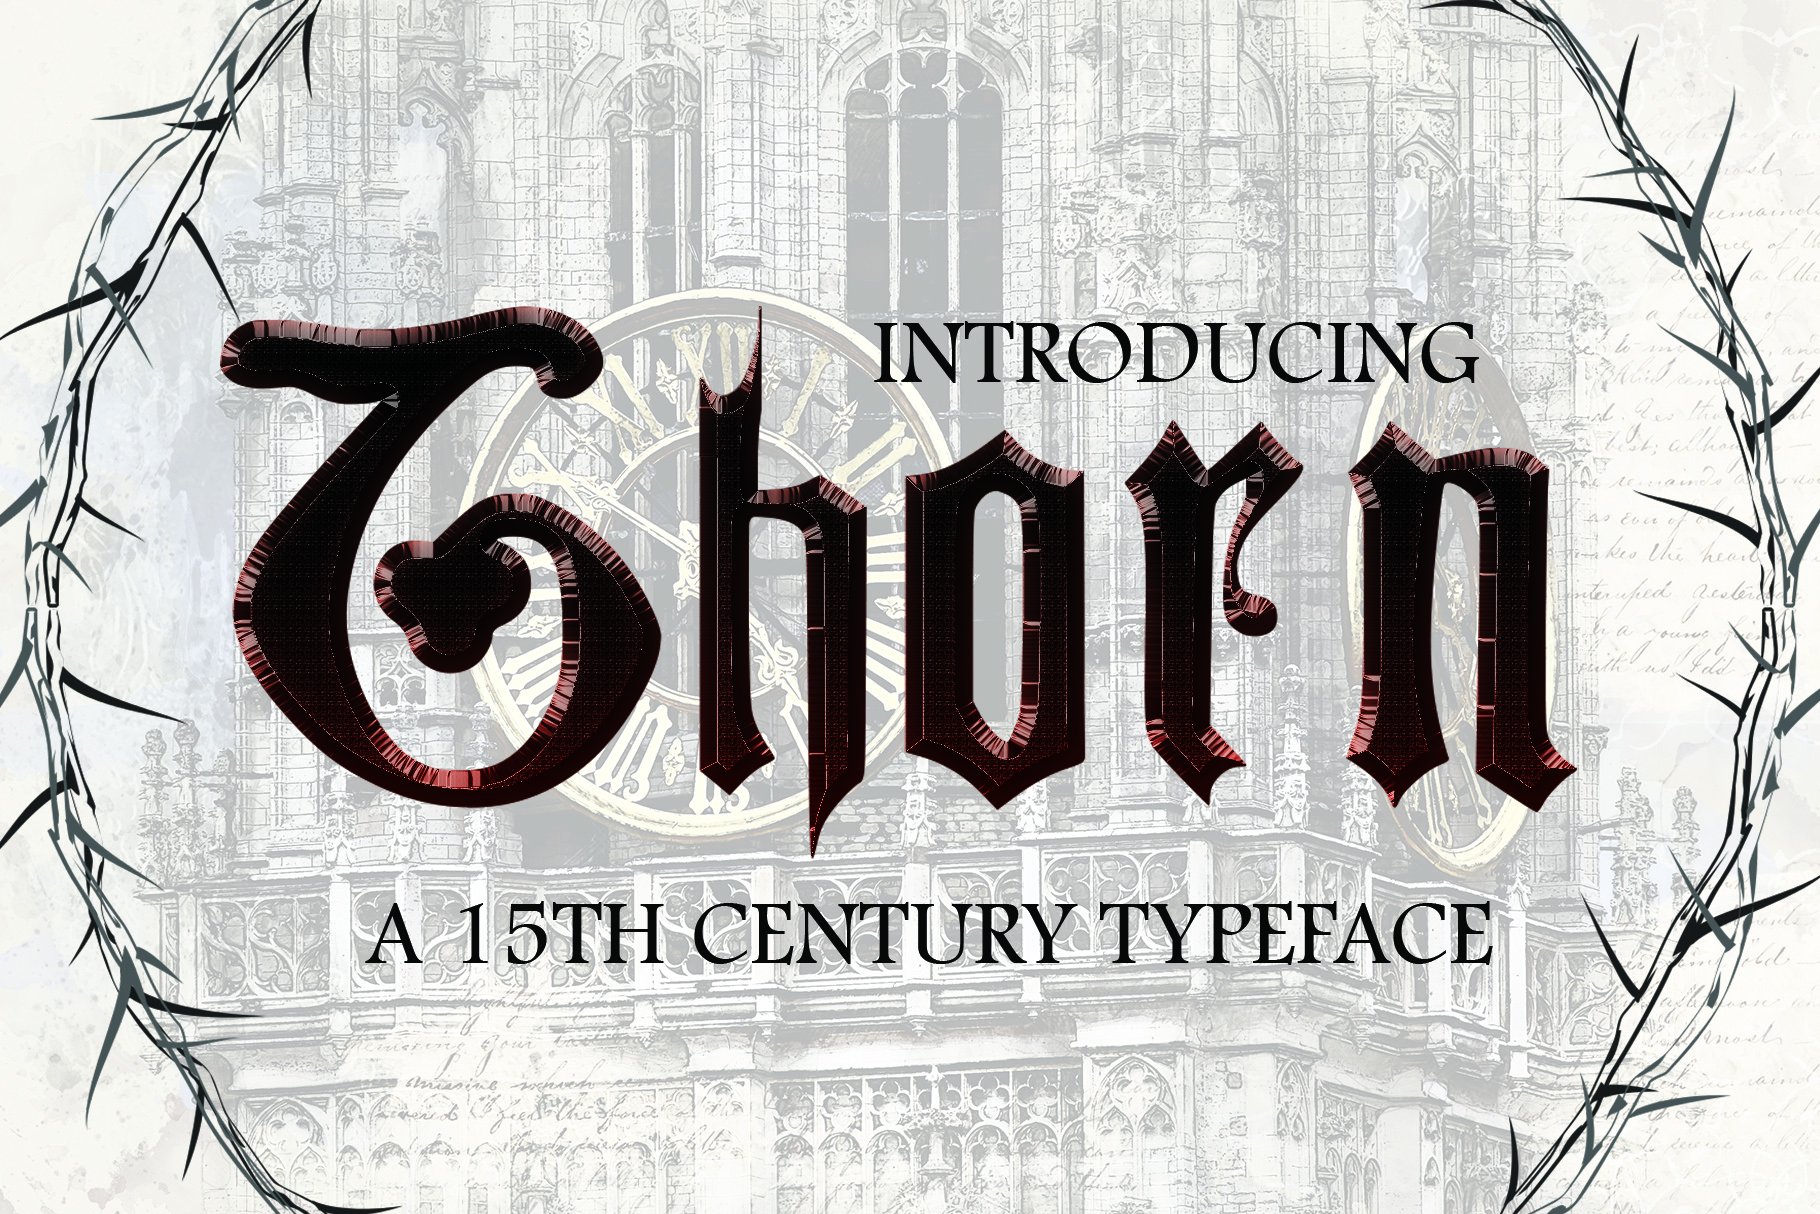 THORN, a Blackletter Typeface cover image.